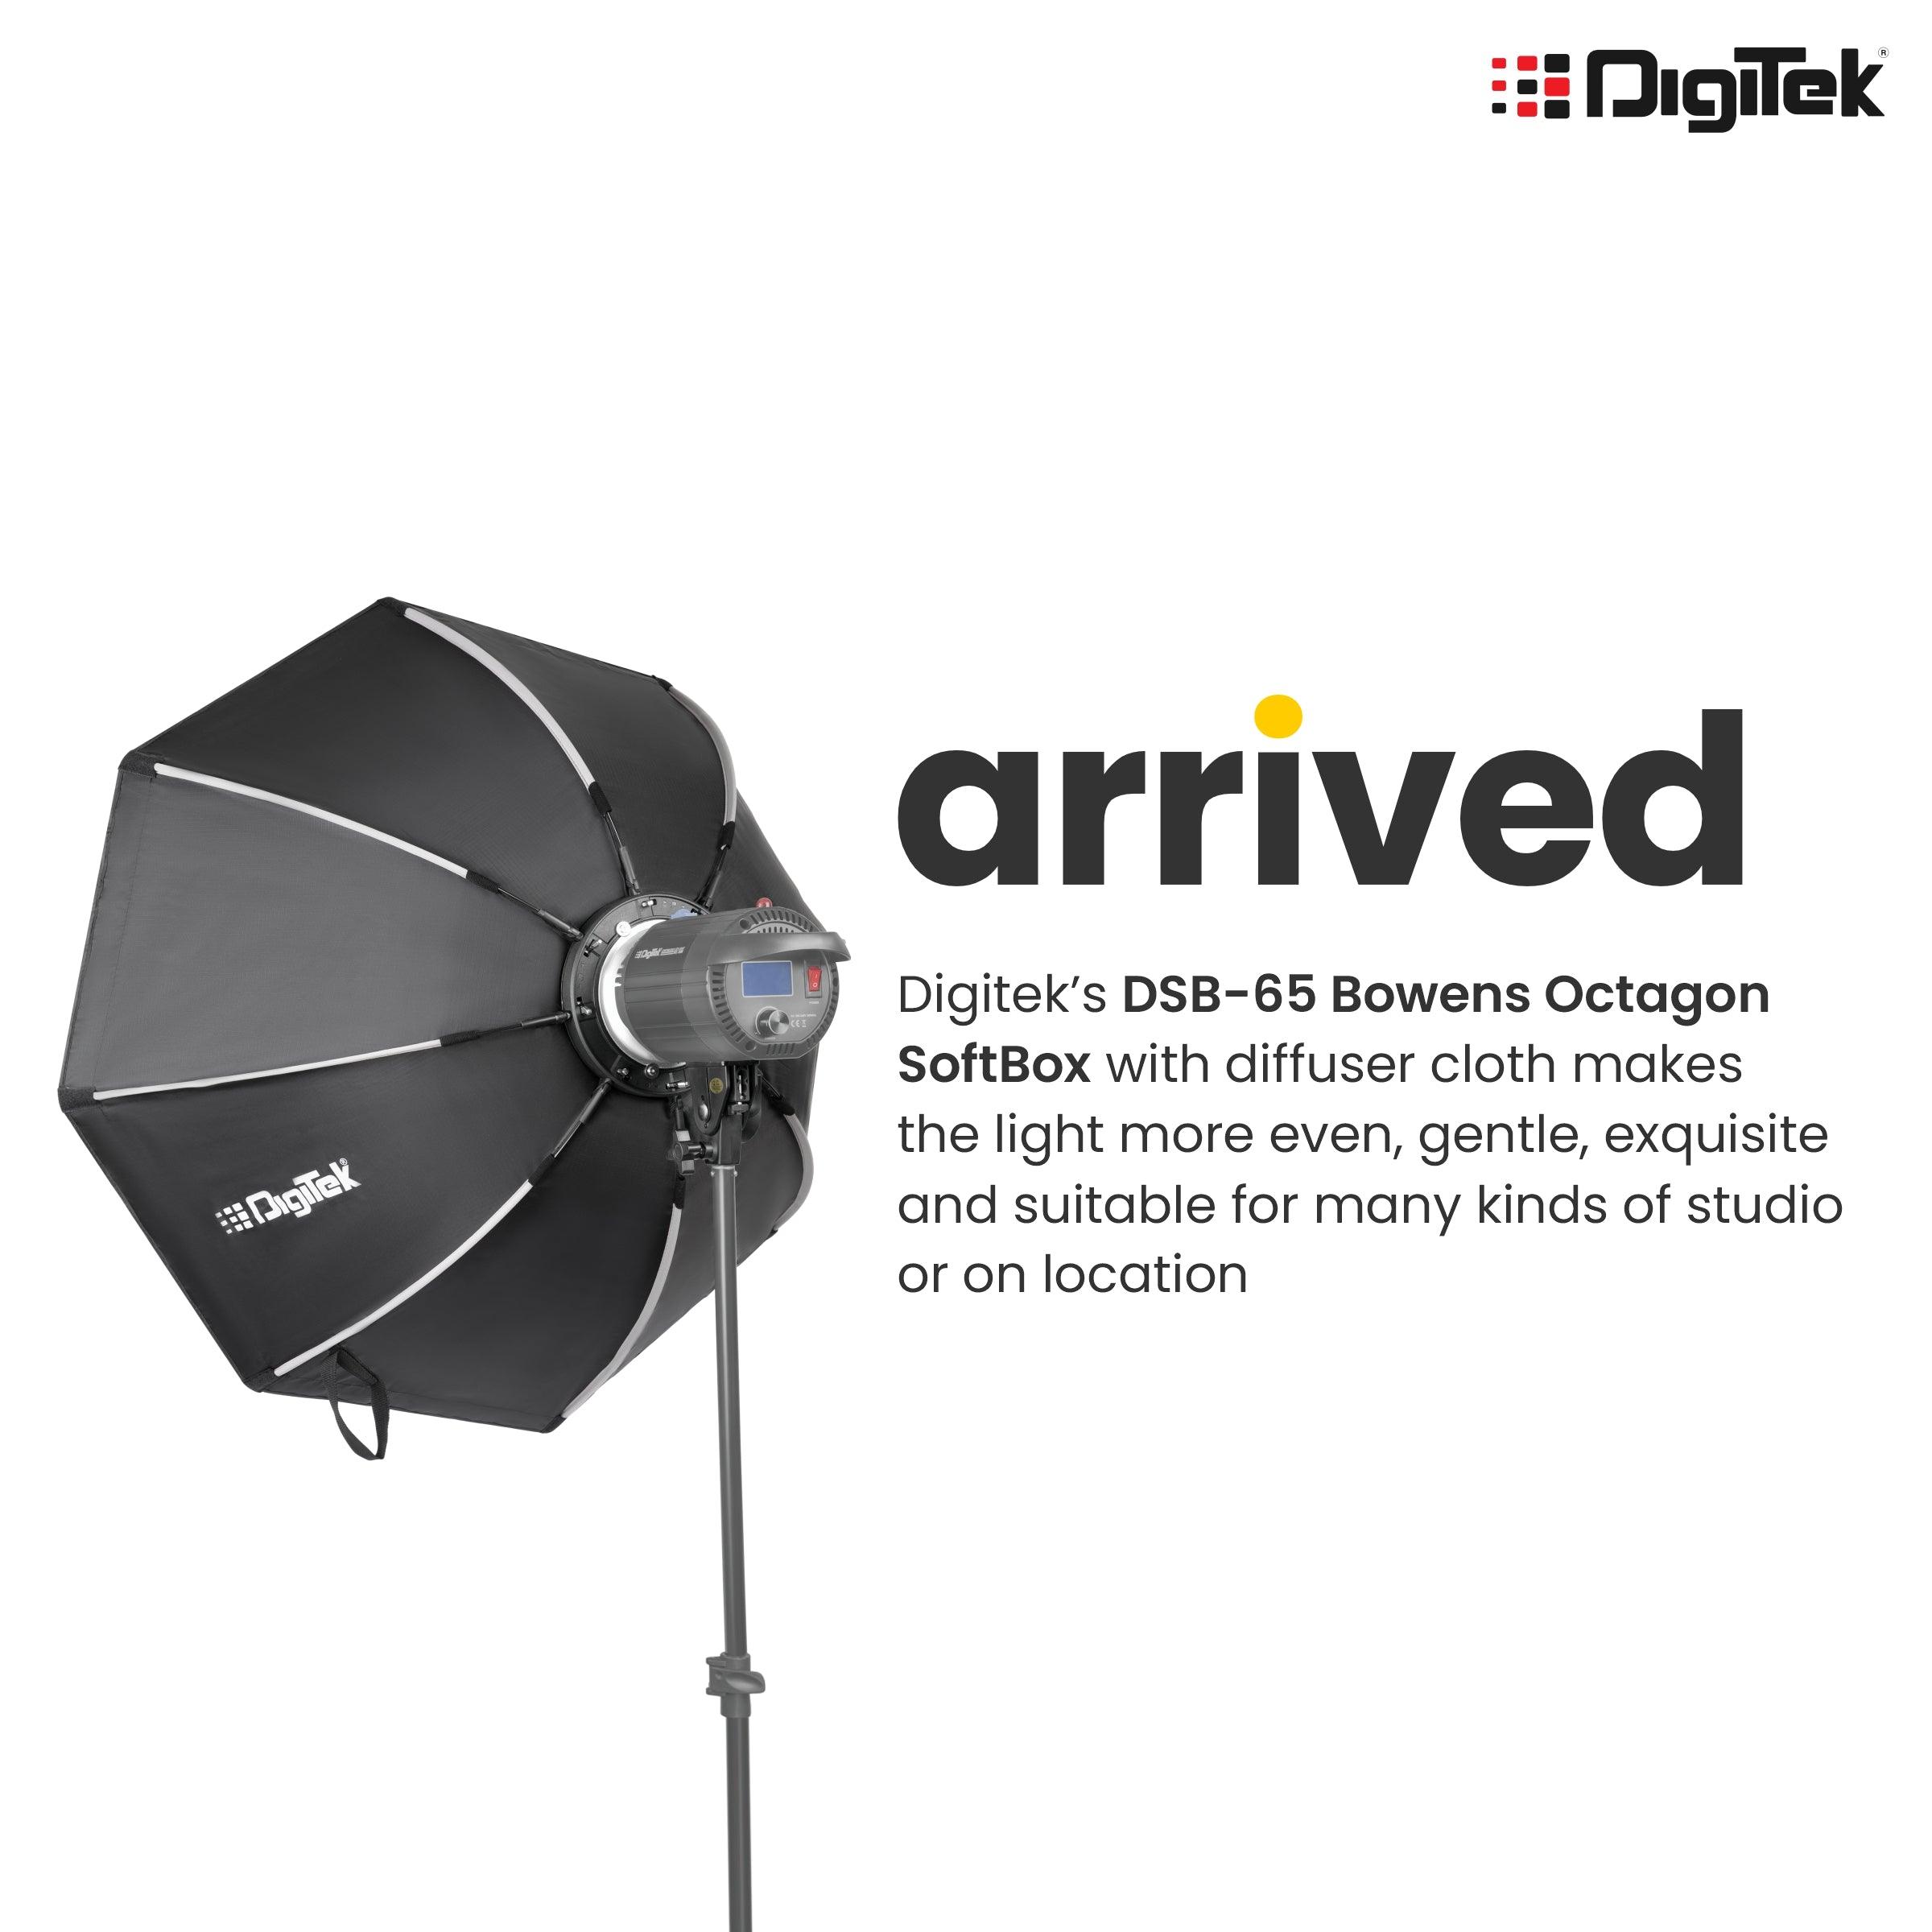 Digitek (DSB-65 Bowens) Octagon Soft Box with Bowens Mount Lightweight & Portable Soft Box Comes with Diffuser Sheets | Carrying Case. DSB-65 Bowens - Digitek